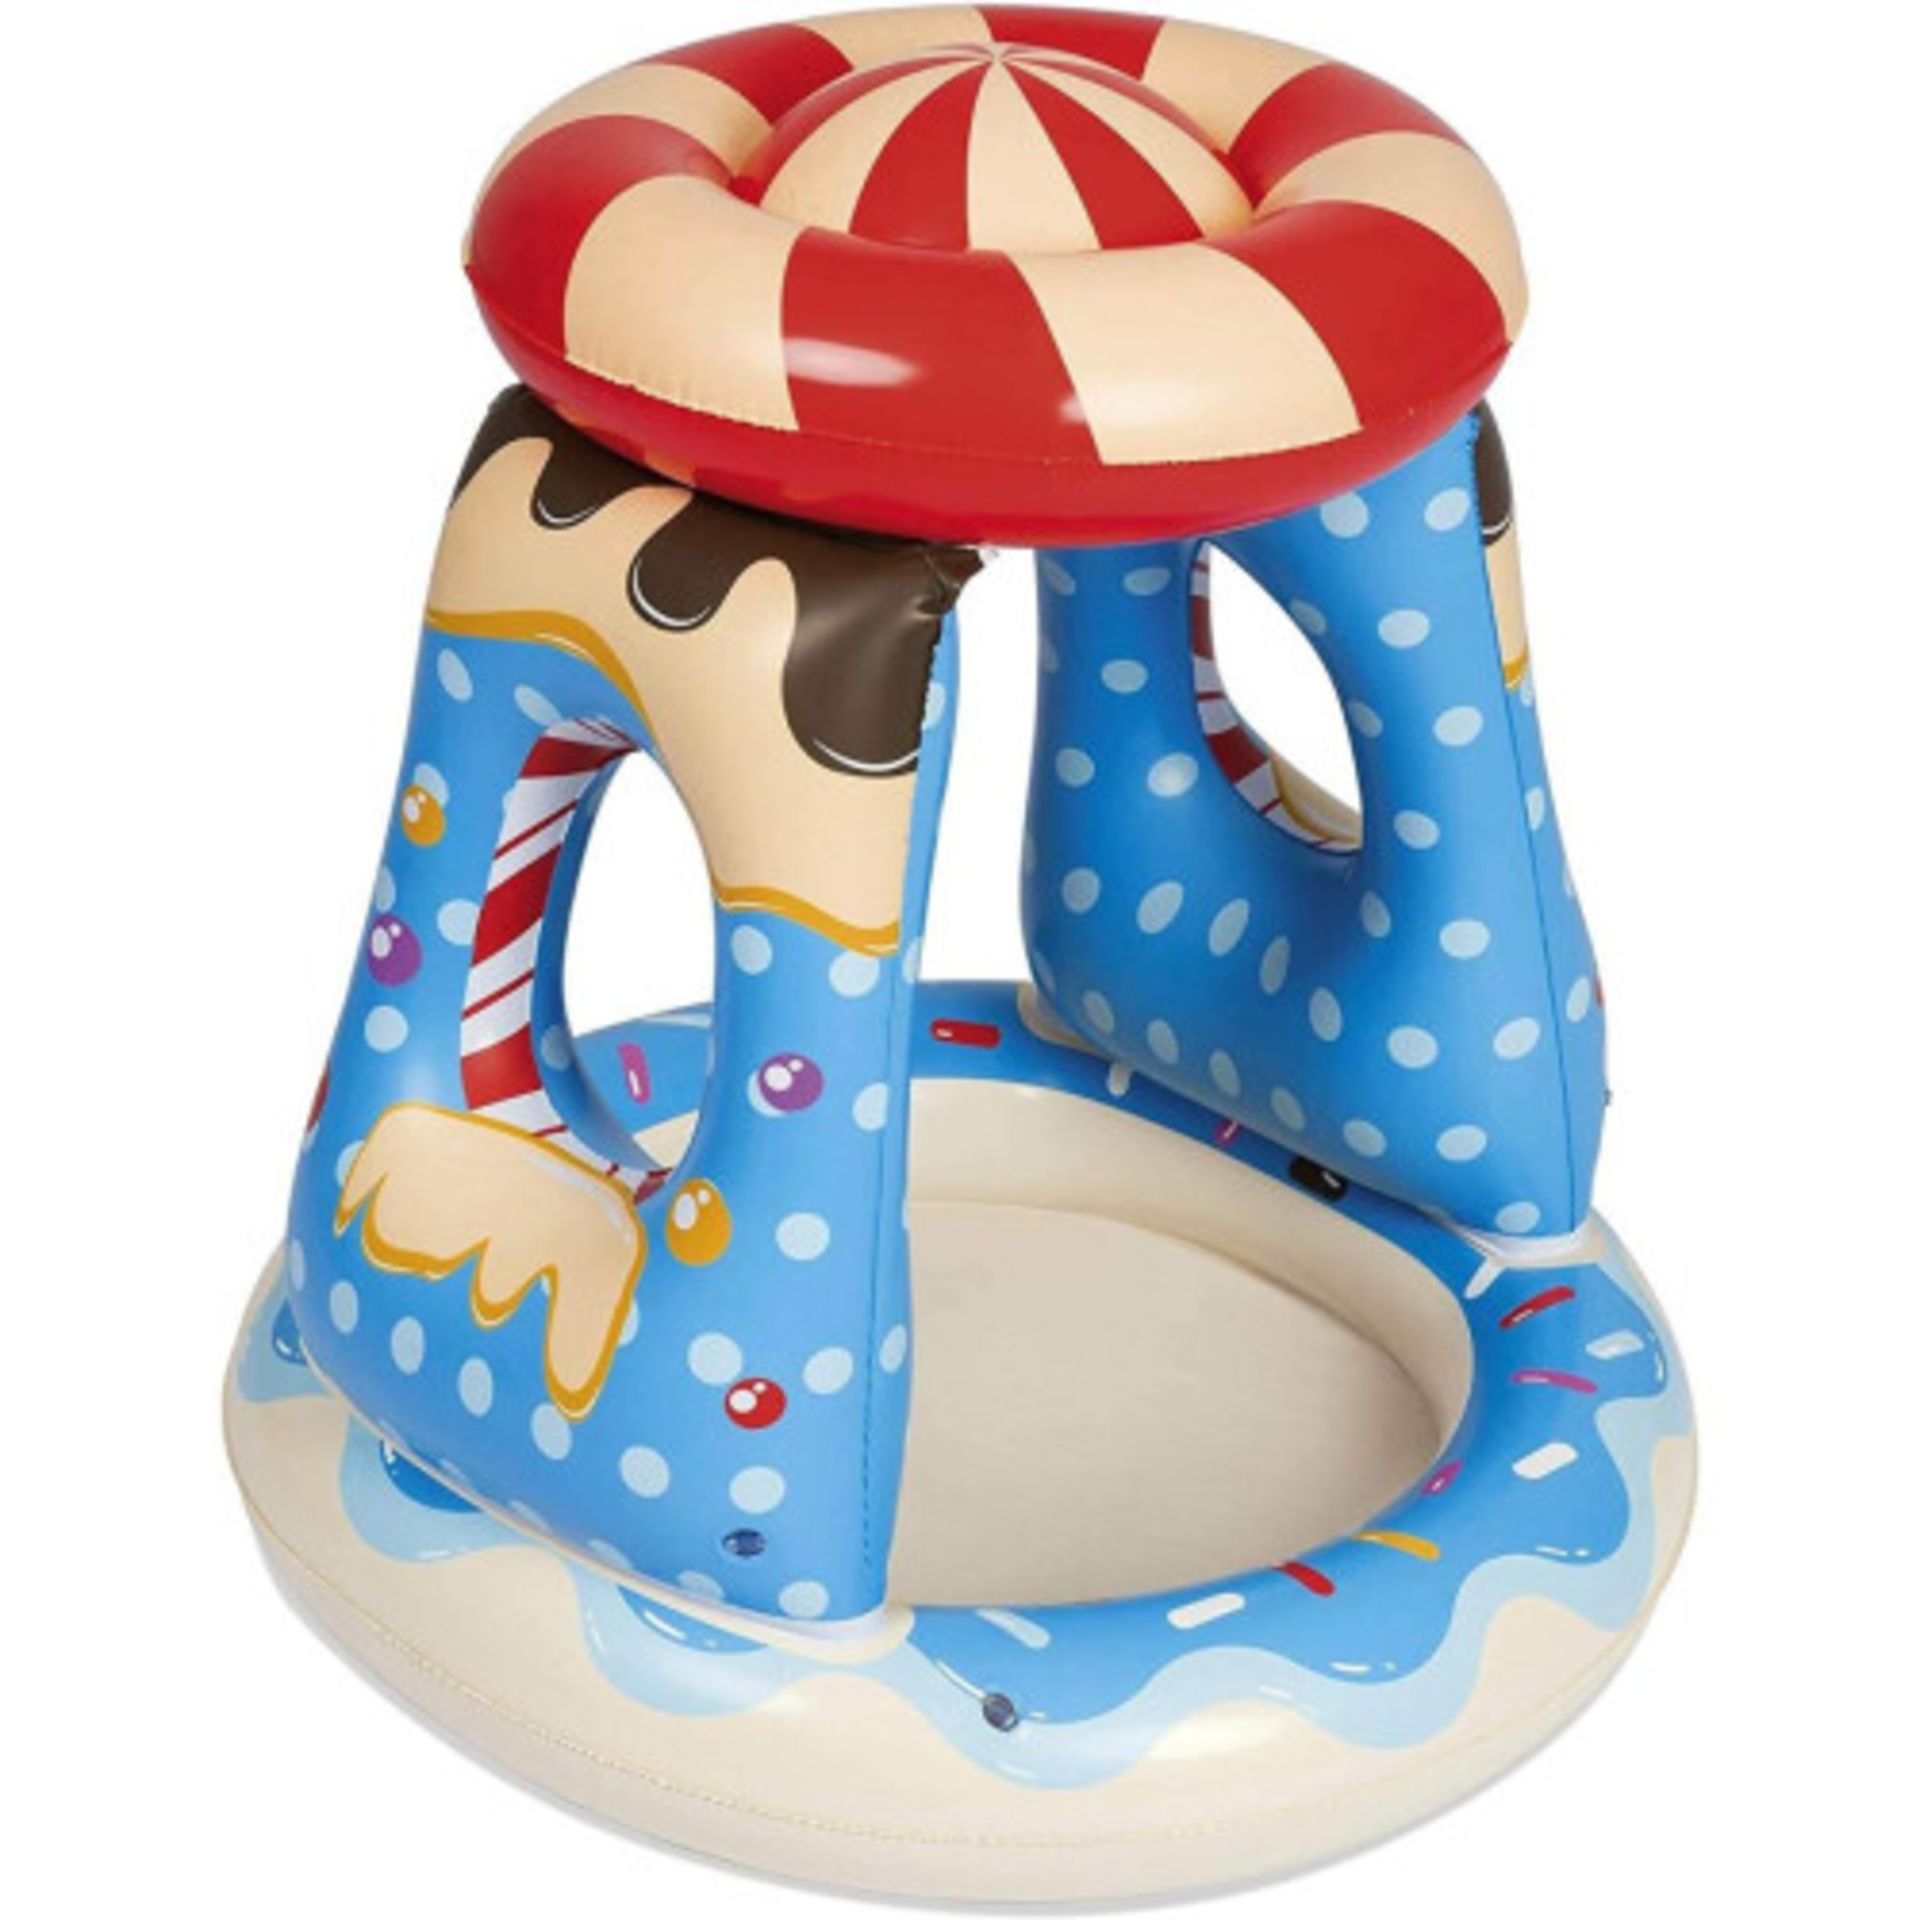 9 X BRAND NEW BESTWAY CANDYVILLE BABY INFLATABLE PADDLING POOL WITH SUNSHADE (91CM X 91 CM X 89 CM ) - Image 2 of 3